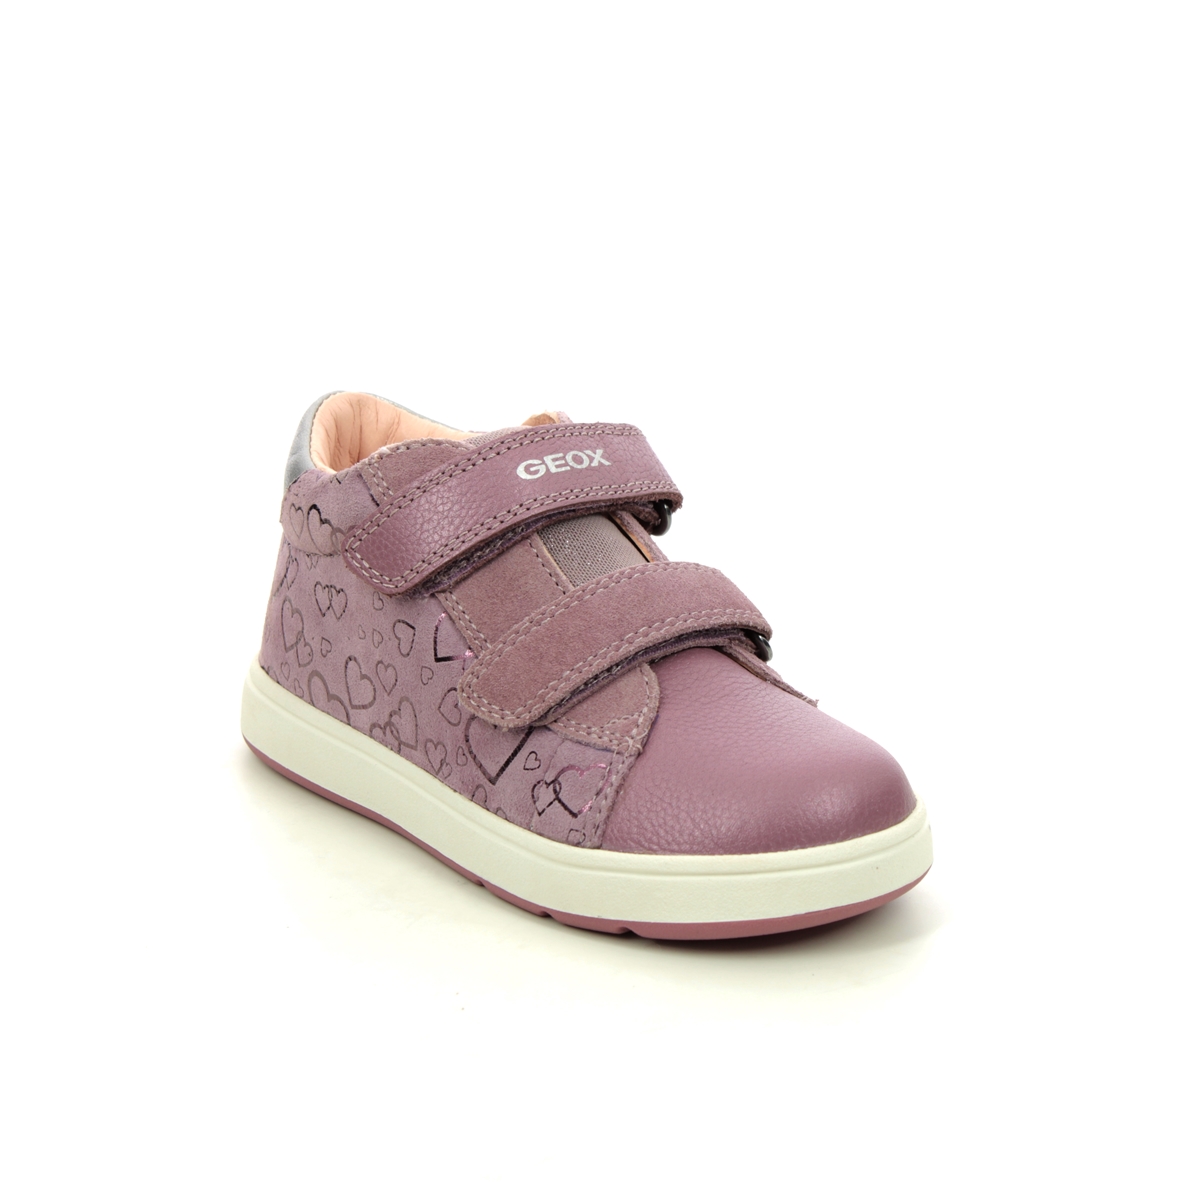 Geox - Biglia G 2V (Pink Leather) B044Cc-C8268 In Size 21 In Plain Pink Leather For kids